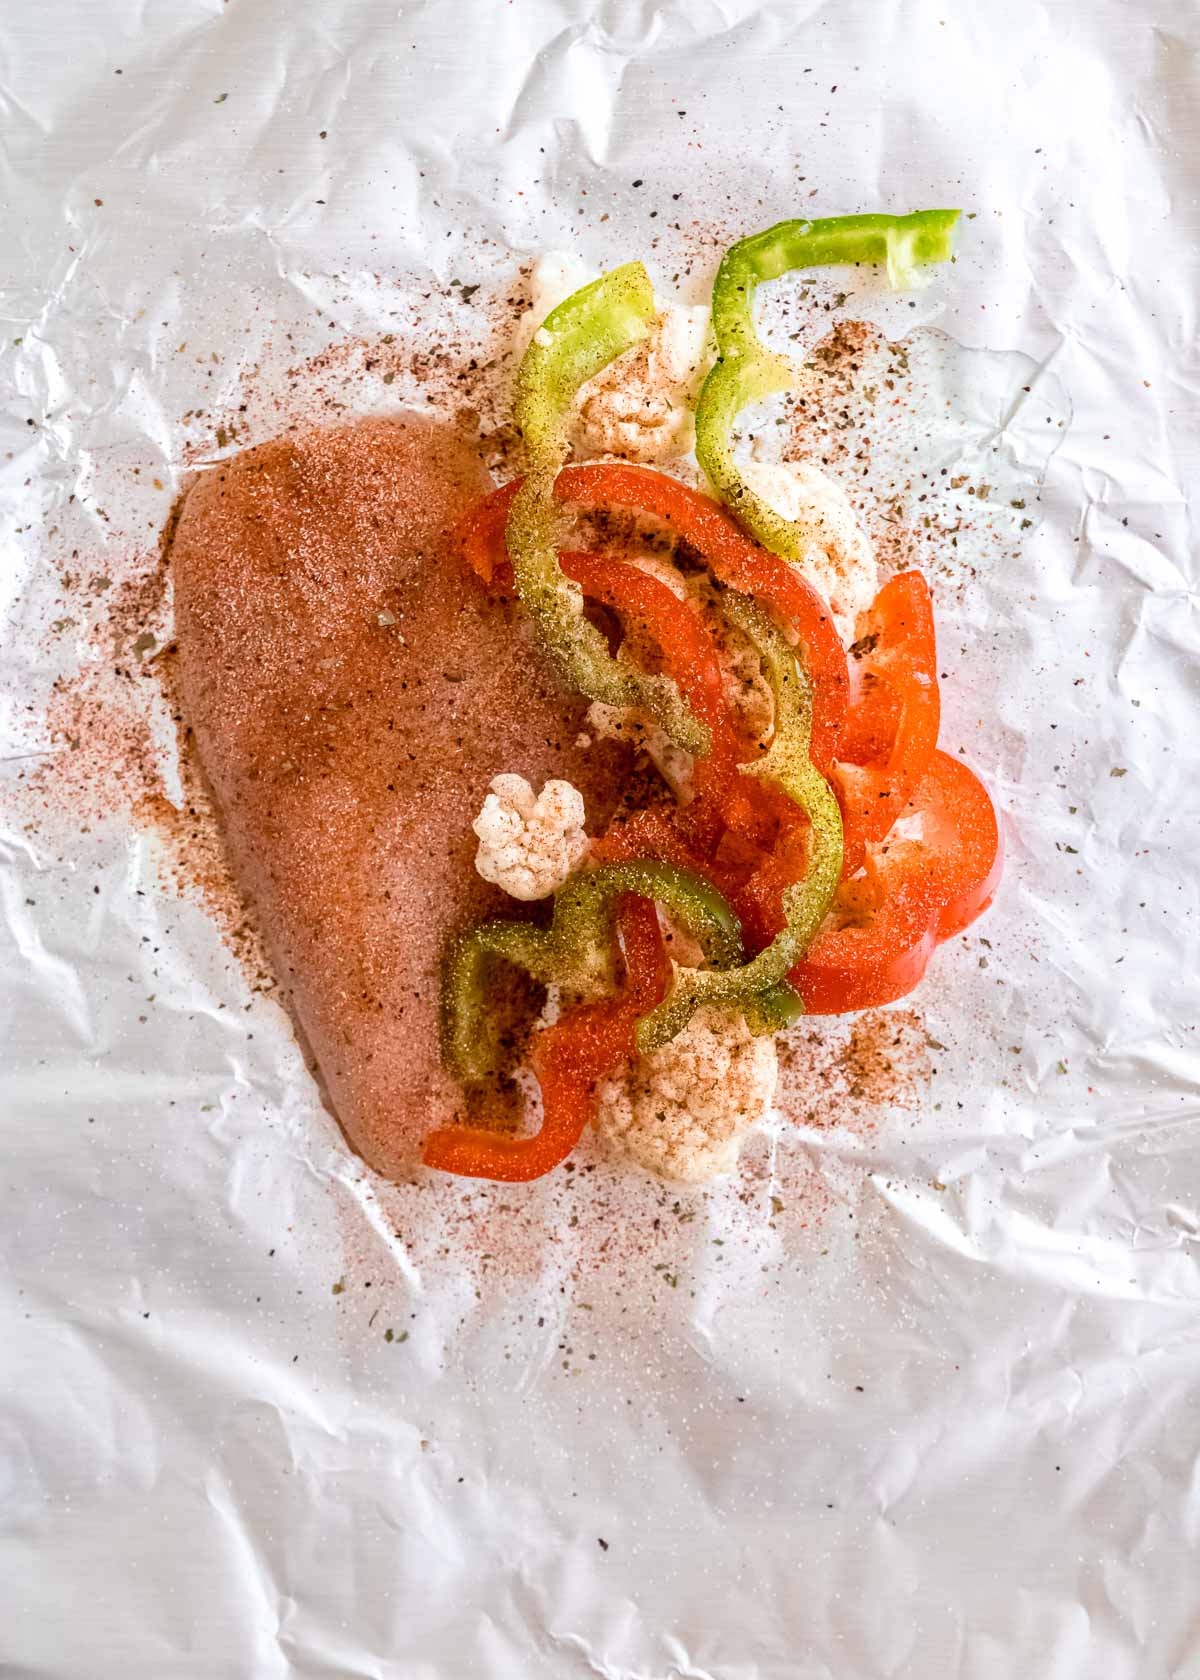 buffalo chicken ingredients laid onto open foil pack